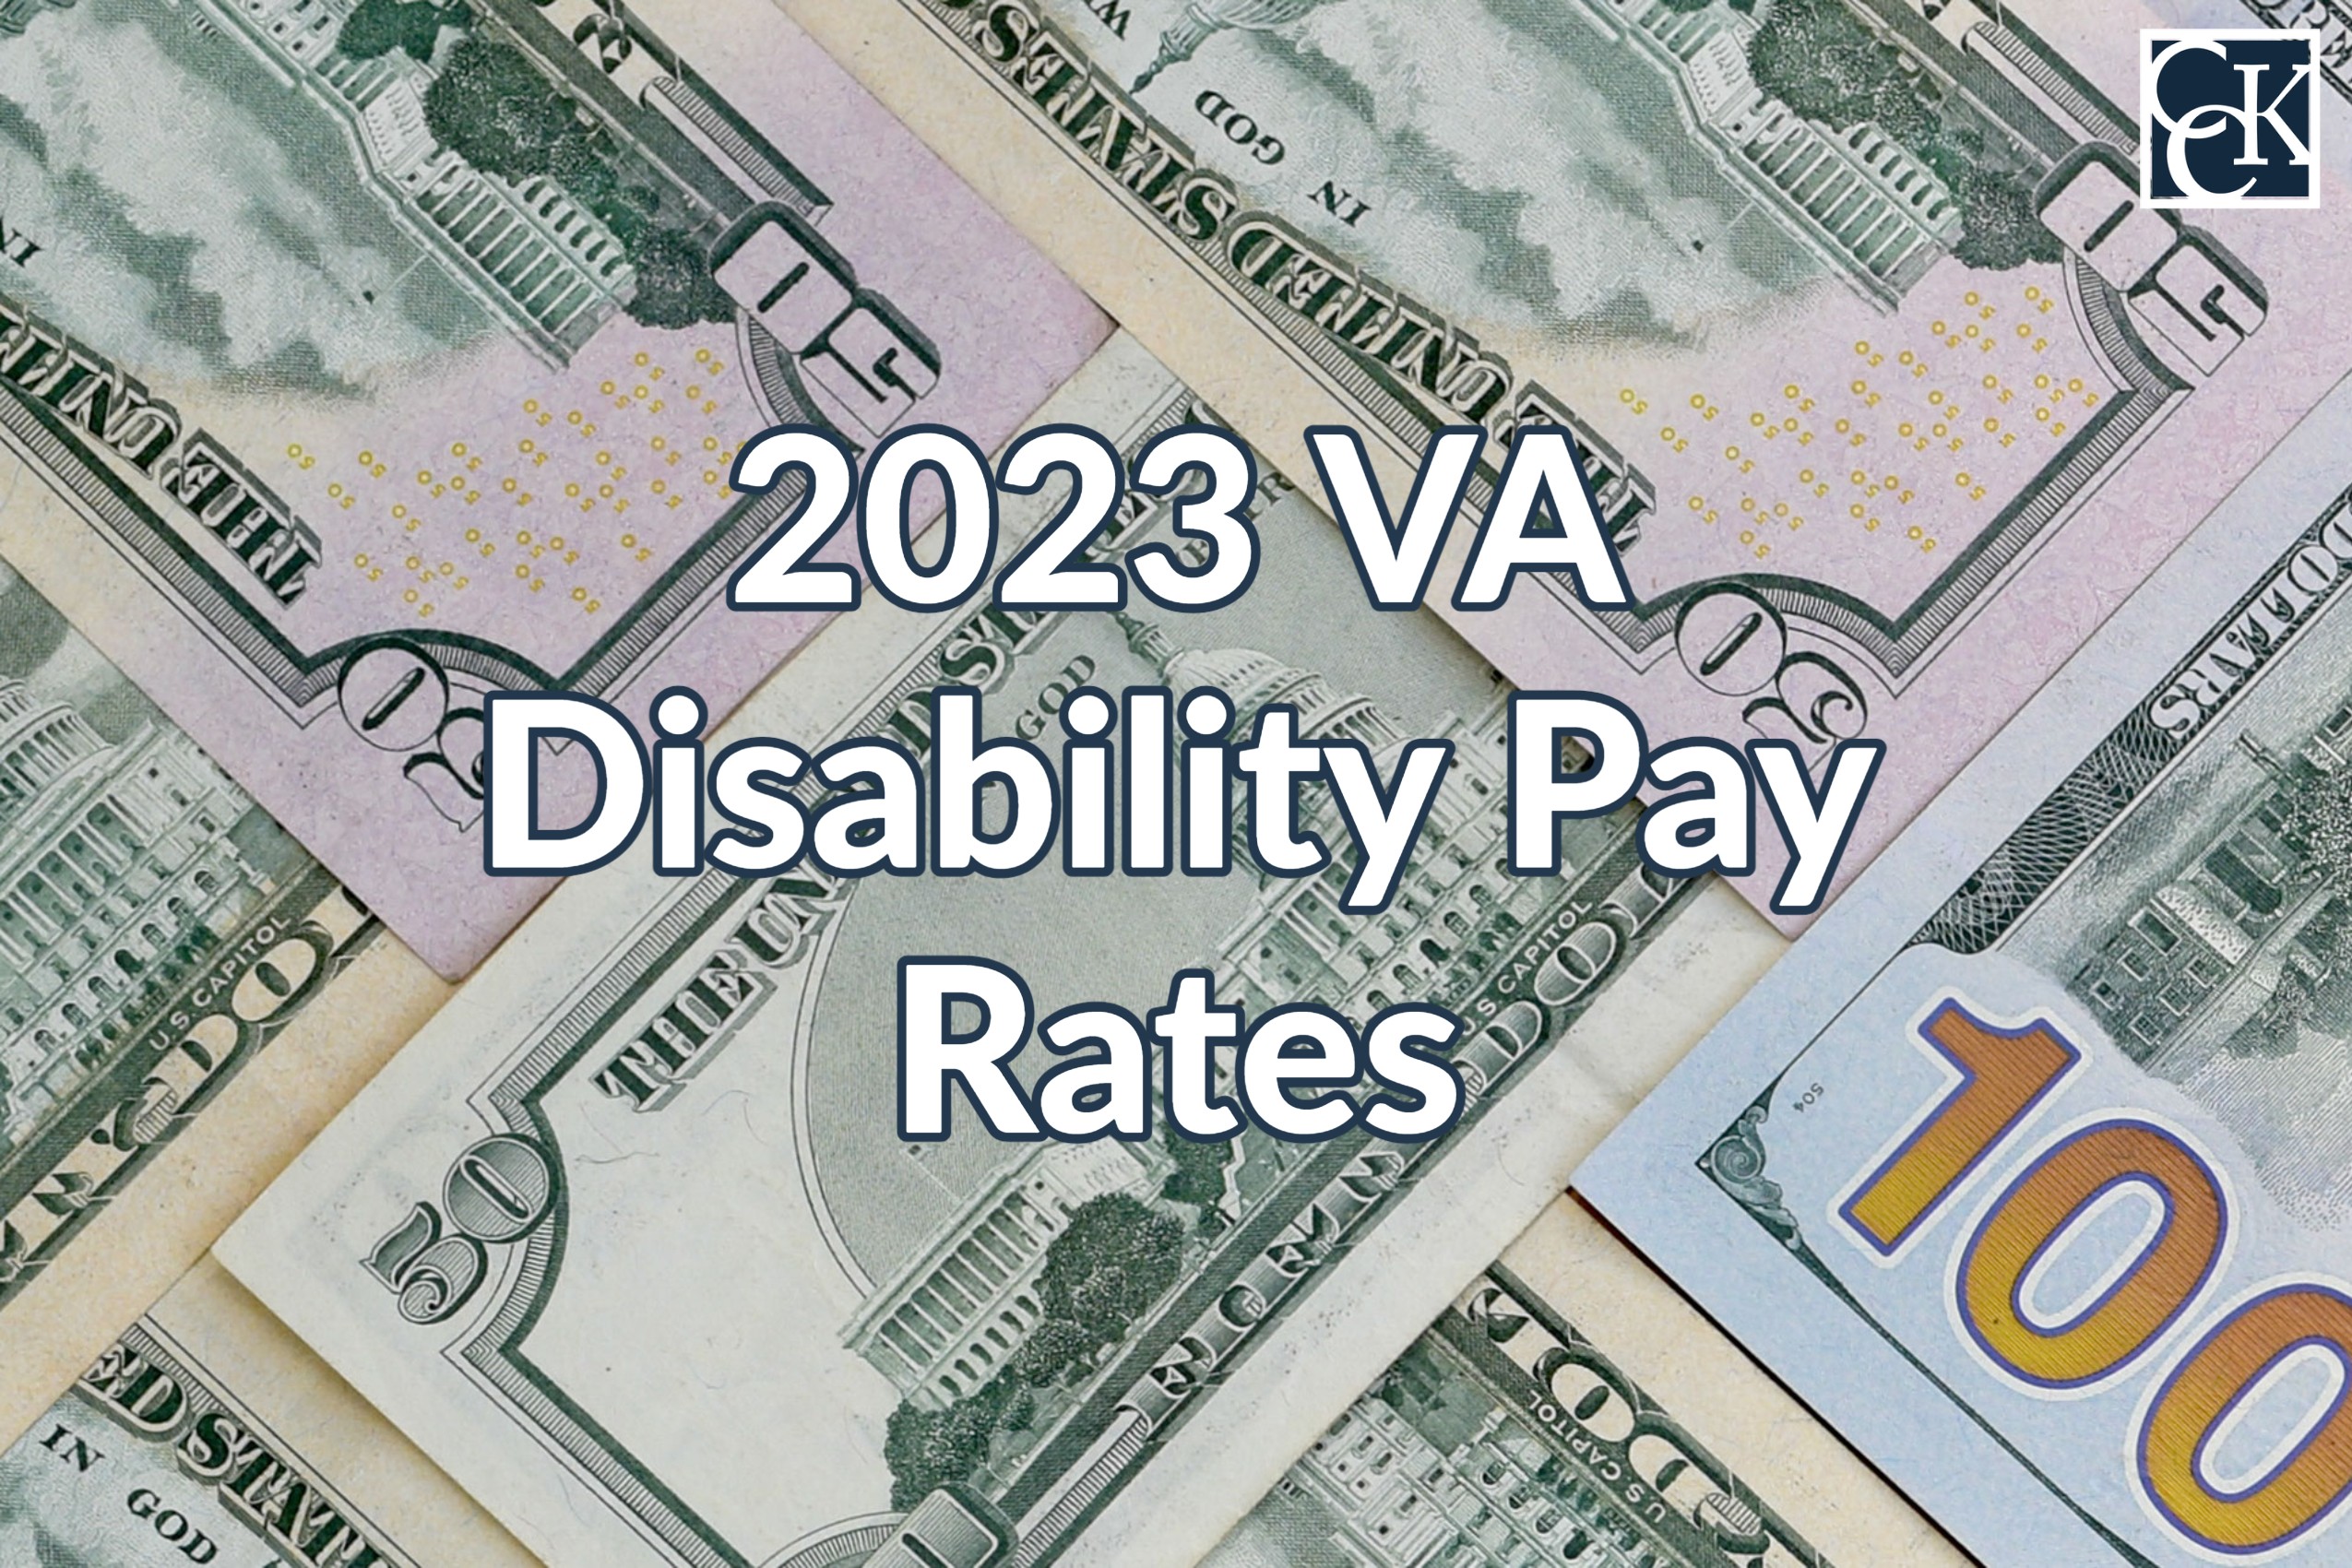 VA Disability Pay Charts For 2023 With Calculator, 40 OFF